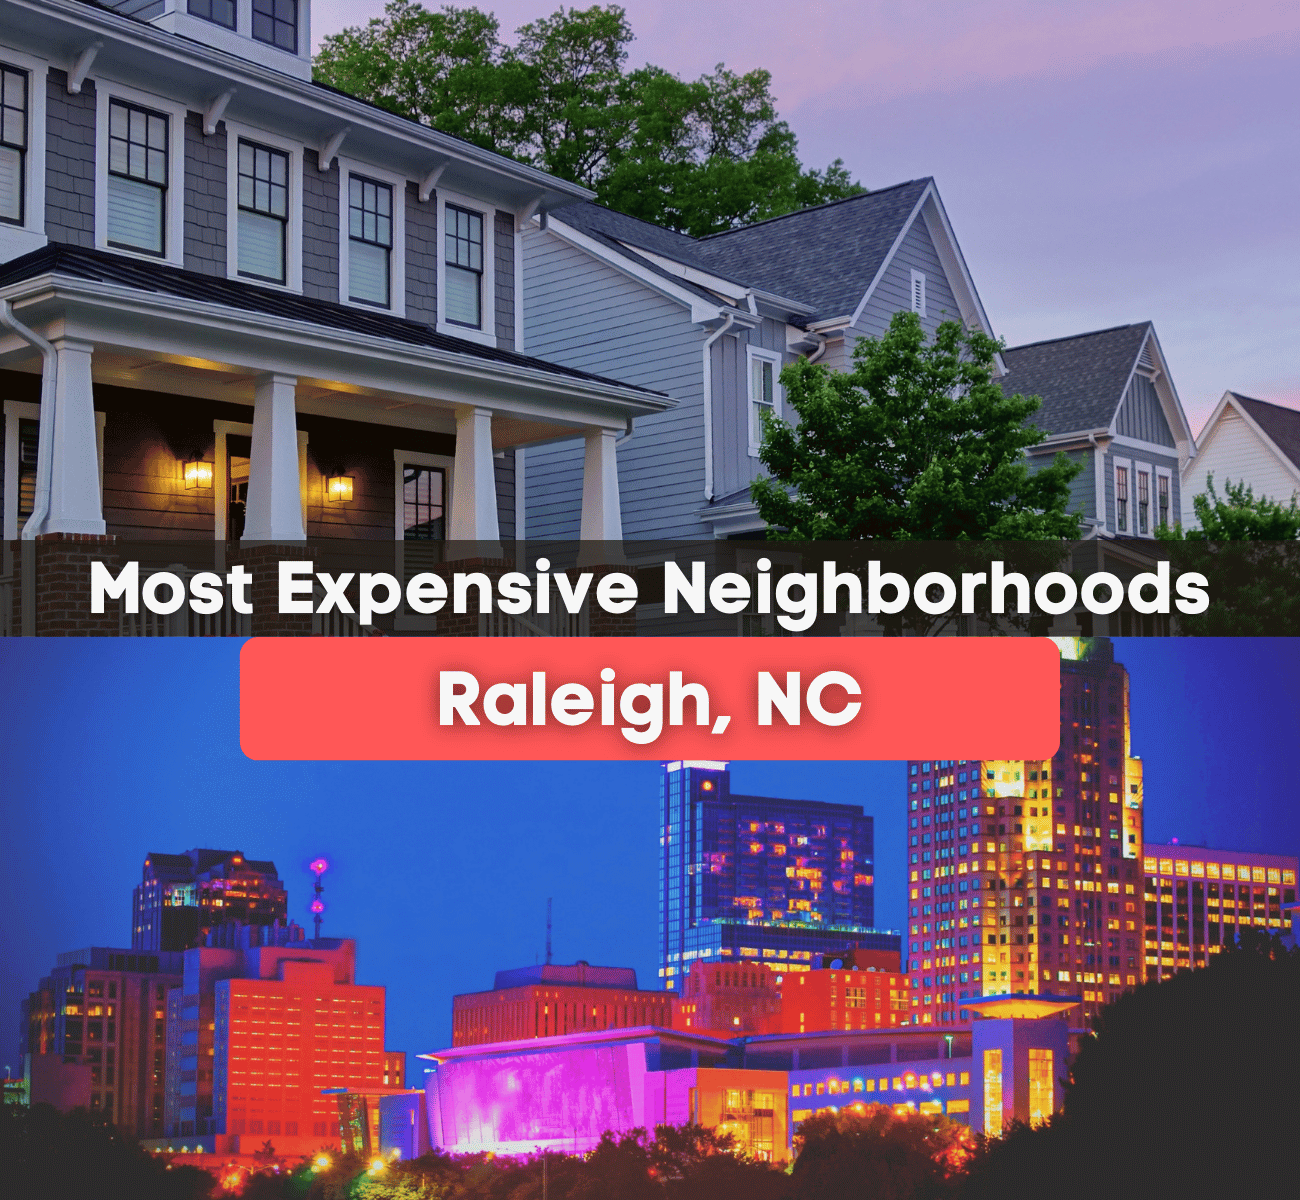 10 Most Expensive Neighborhoods in Raleigh: Raleigh, NC Luxury Living Guide